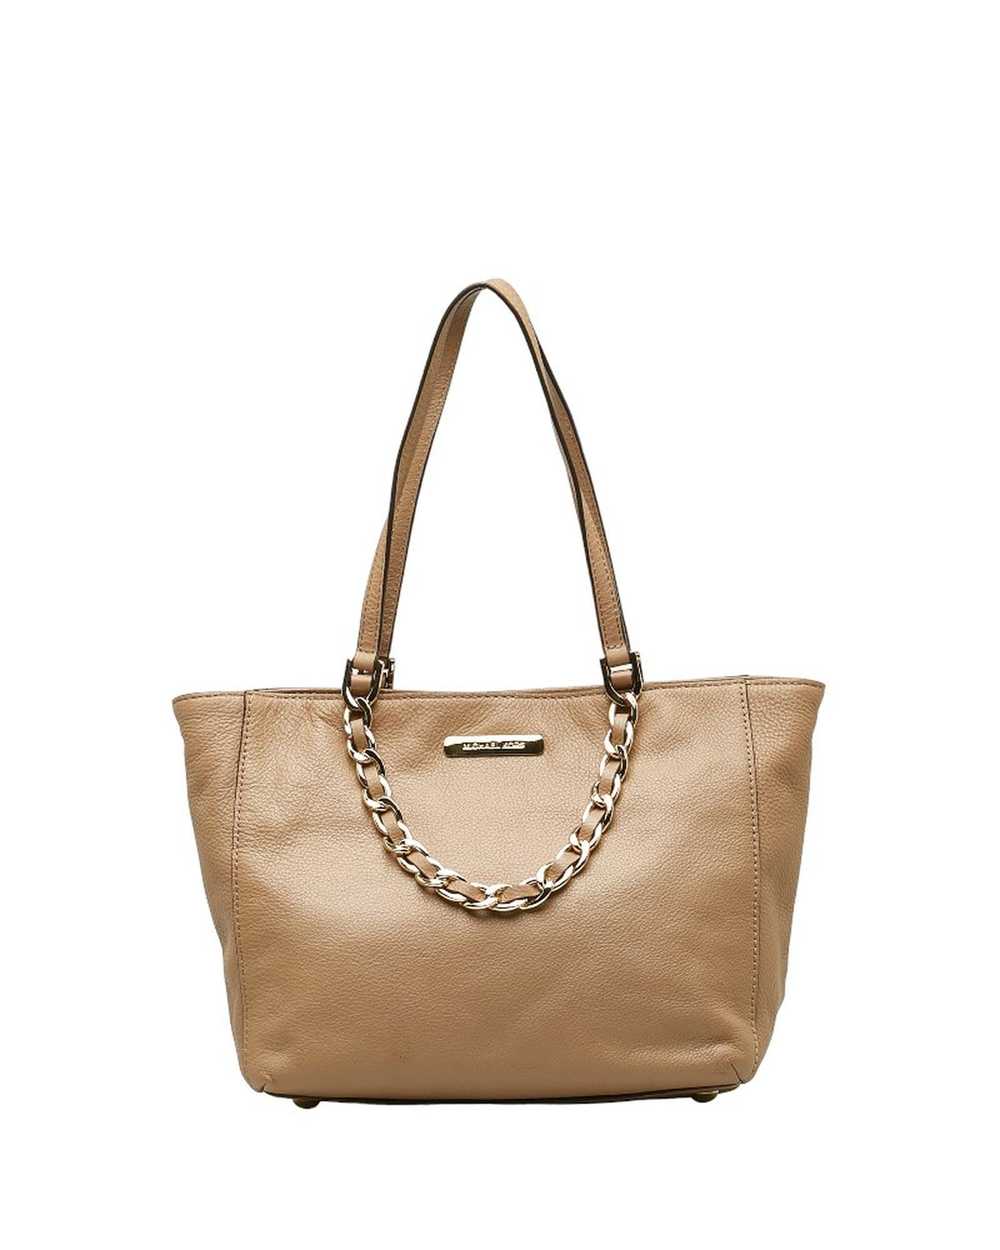 Michael Kors Leather Chained Tote Bag in Brown - image 1